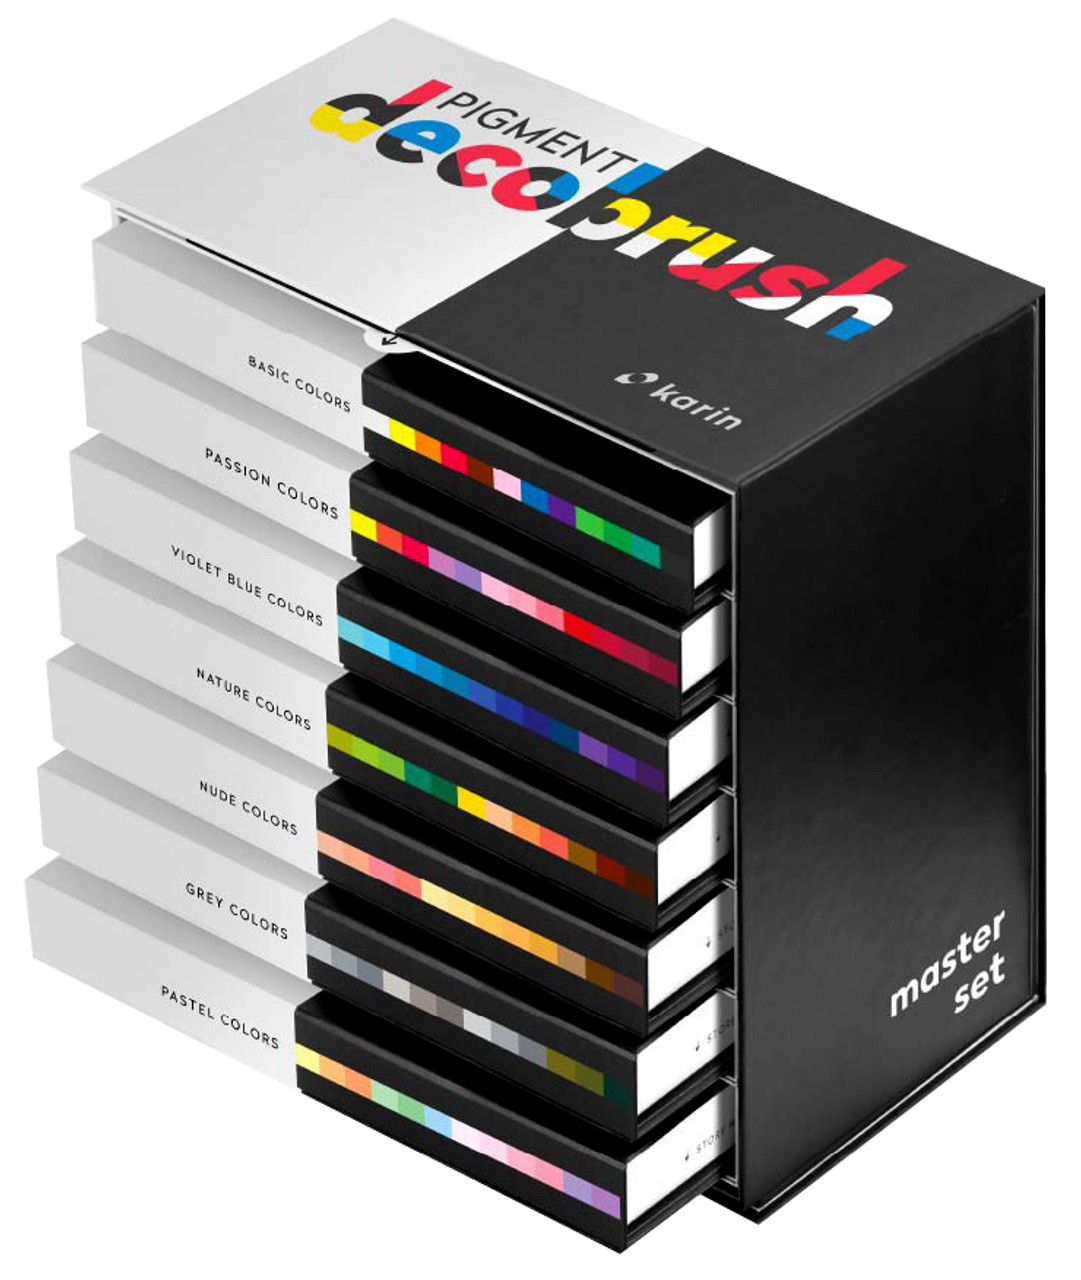 Karin Brushmarkers Pro Markers and Sets - Set of 12, Sky Colors 